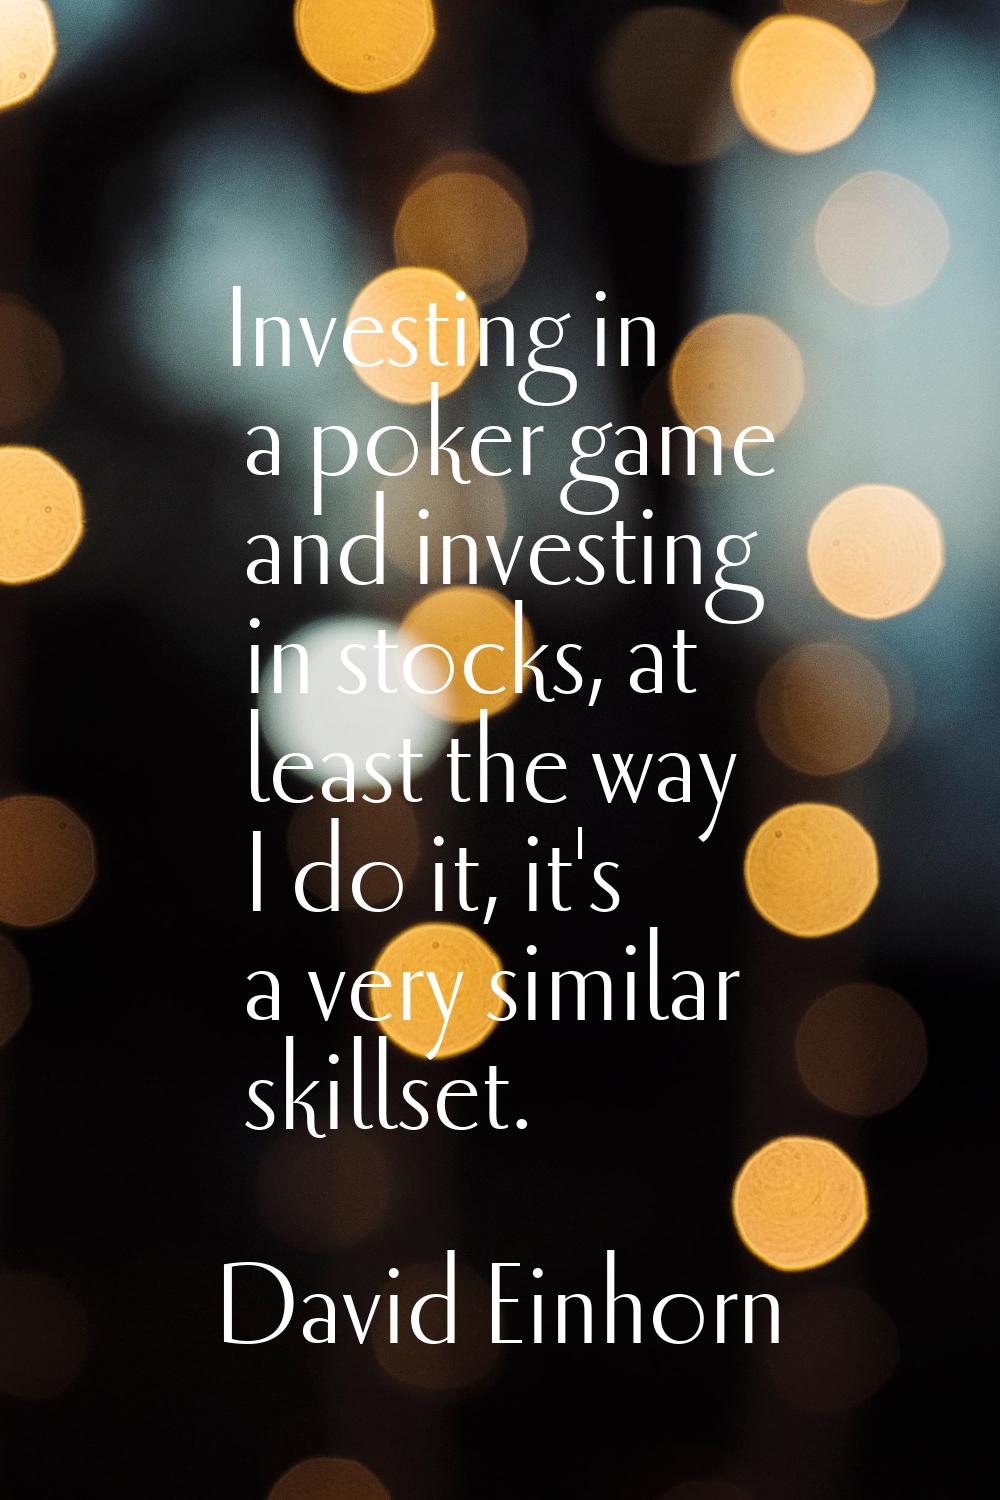 Investing in a poker game and investing in stocks, at least the way I do it, it's a very similar sk